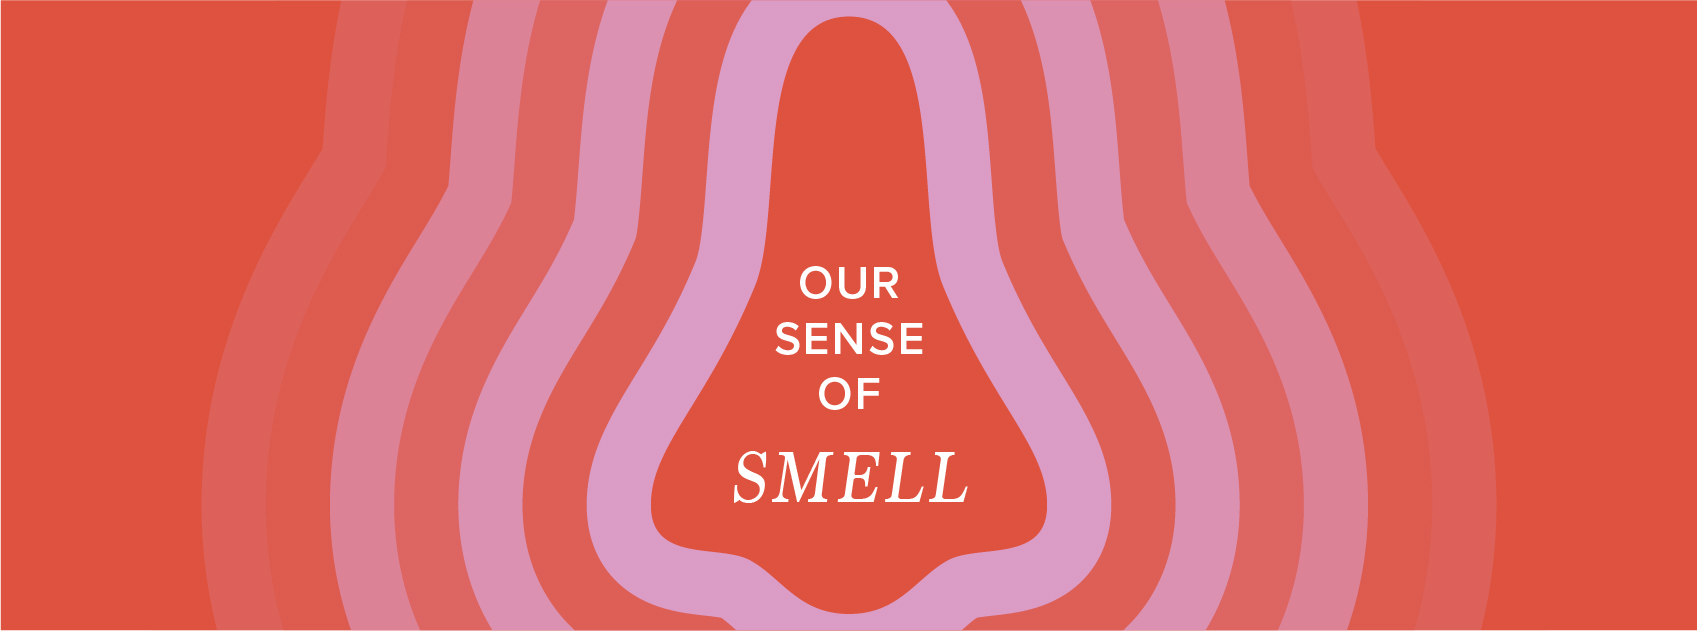 title our sense of smell in red and pink noses